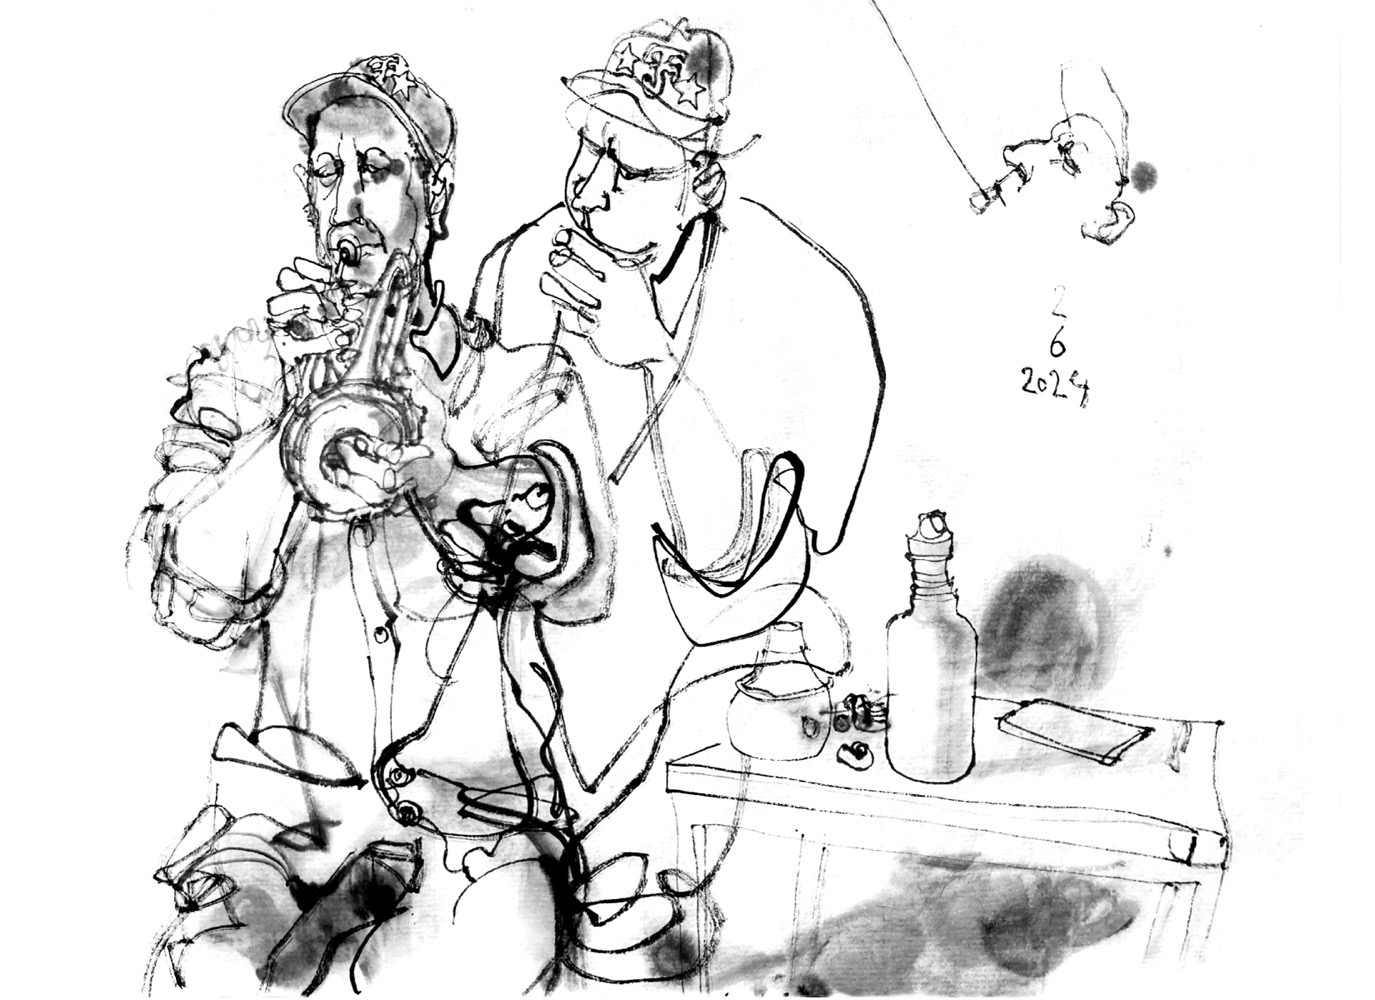 Ink drawing of a man, playing the trumpet, depicted three times.